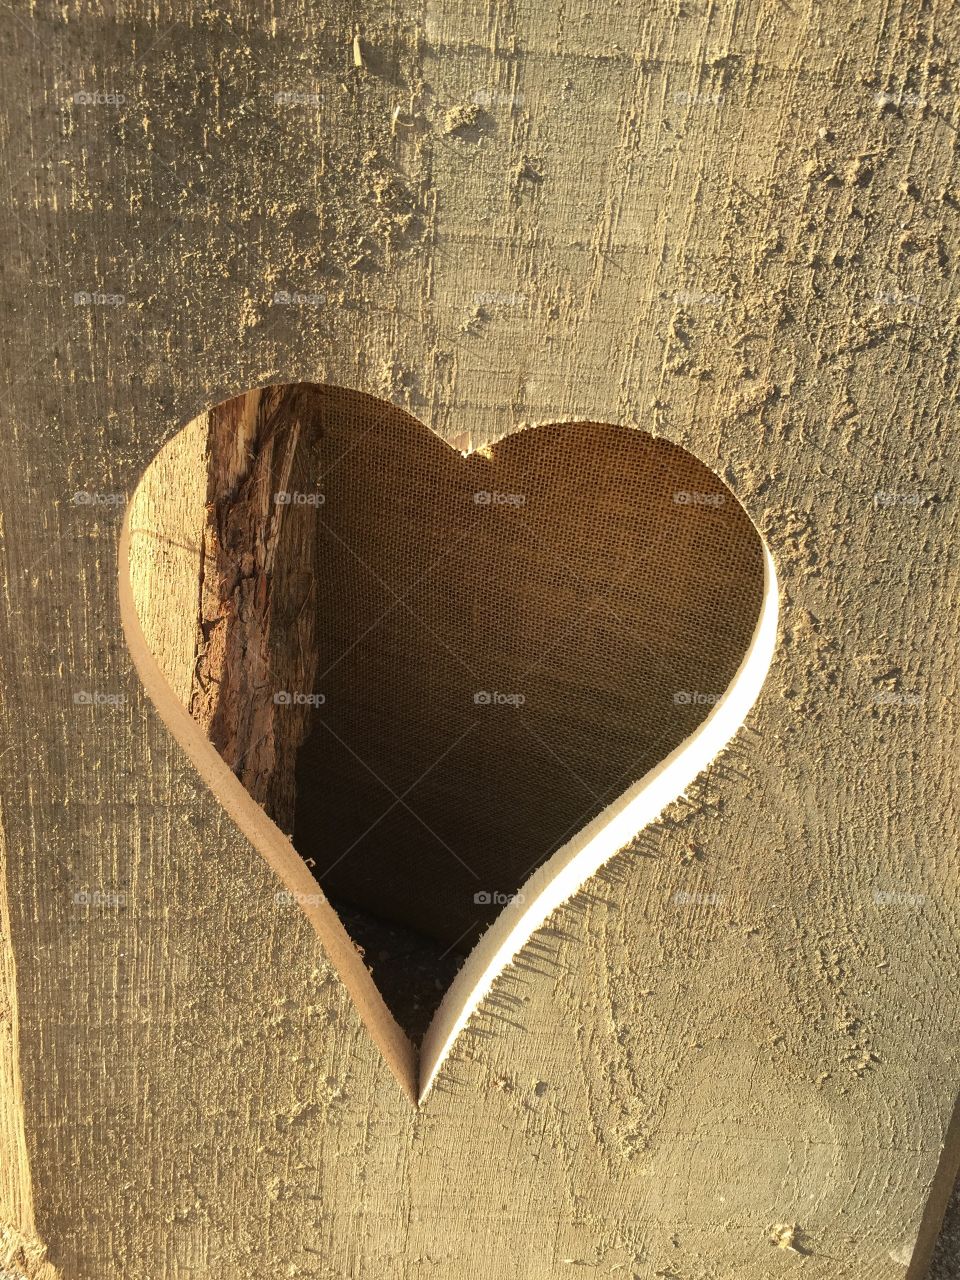 Heart cut-out in a piece of wood on a sunny day.